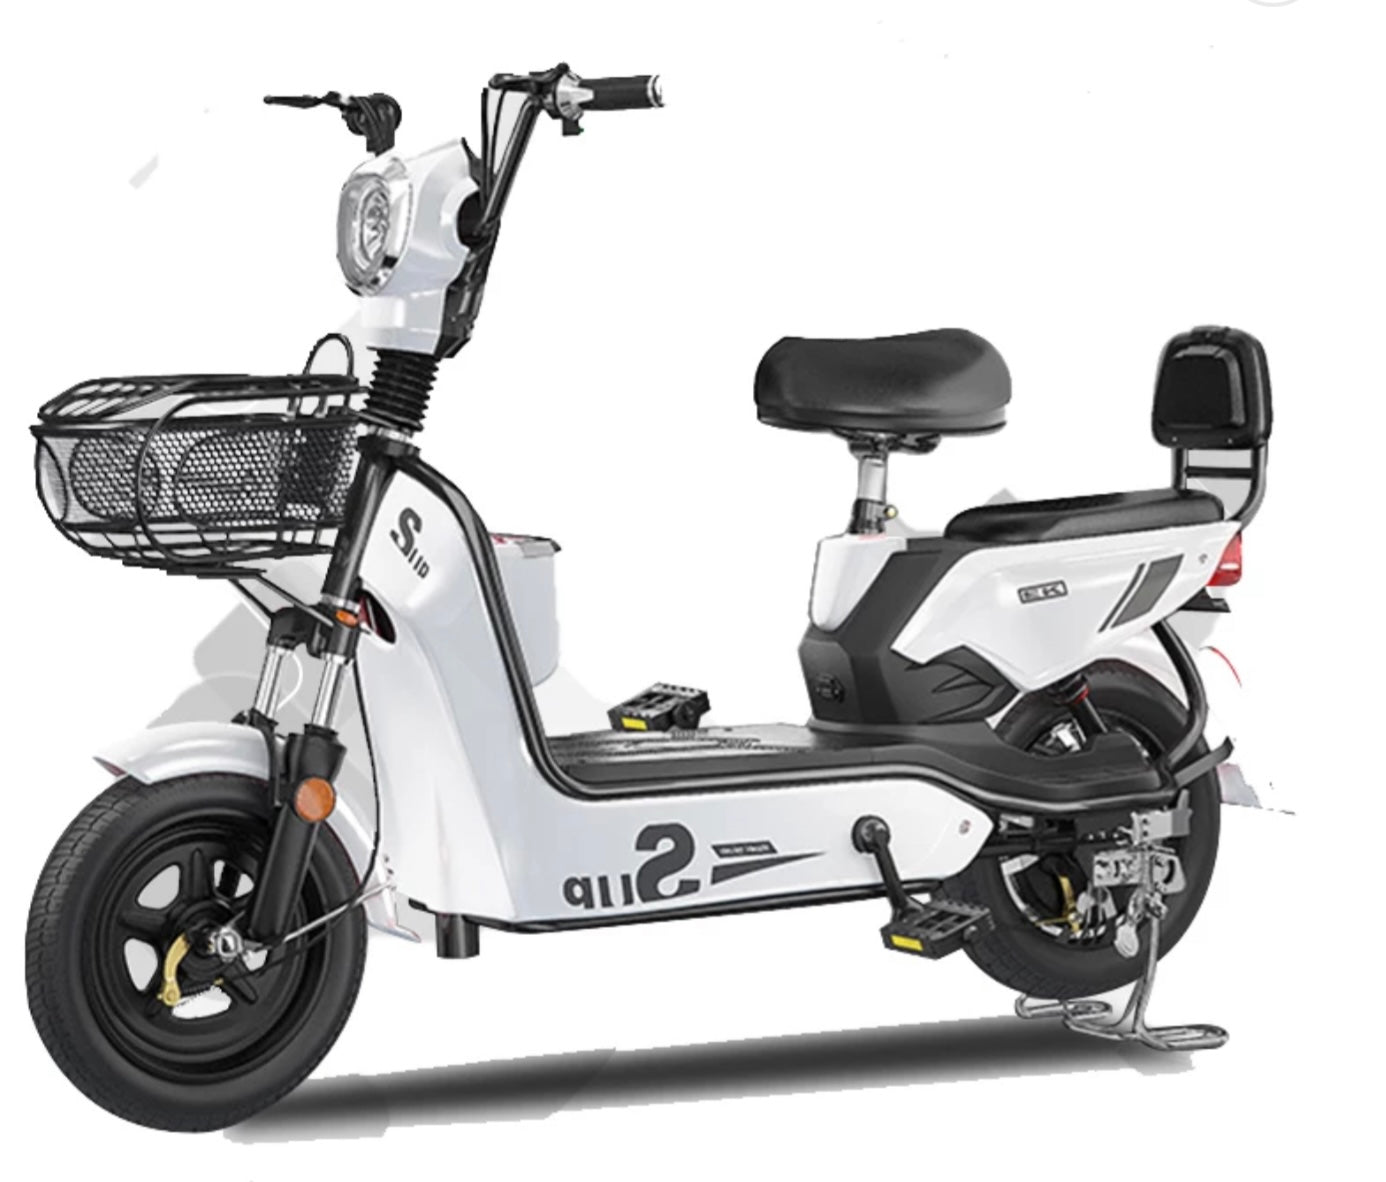 Rhino X Electric Scooter up to 18 MPH